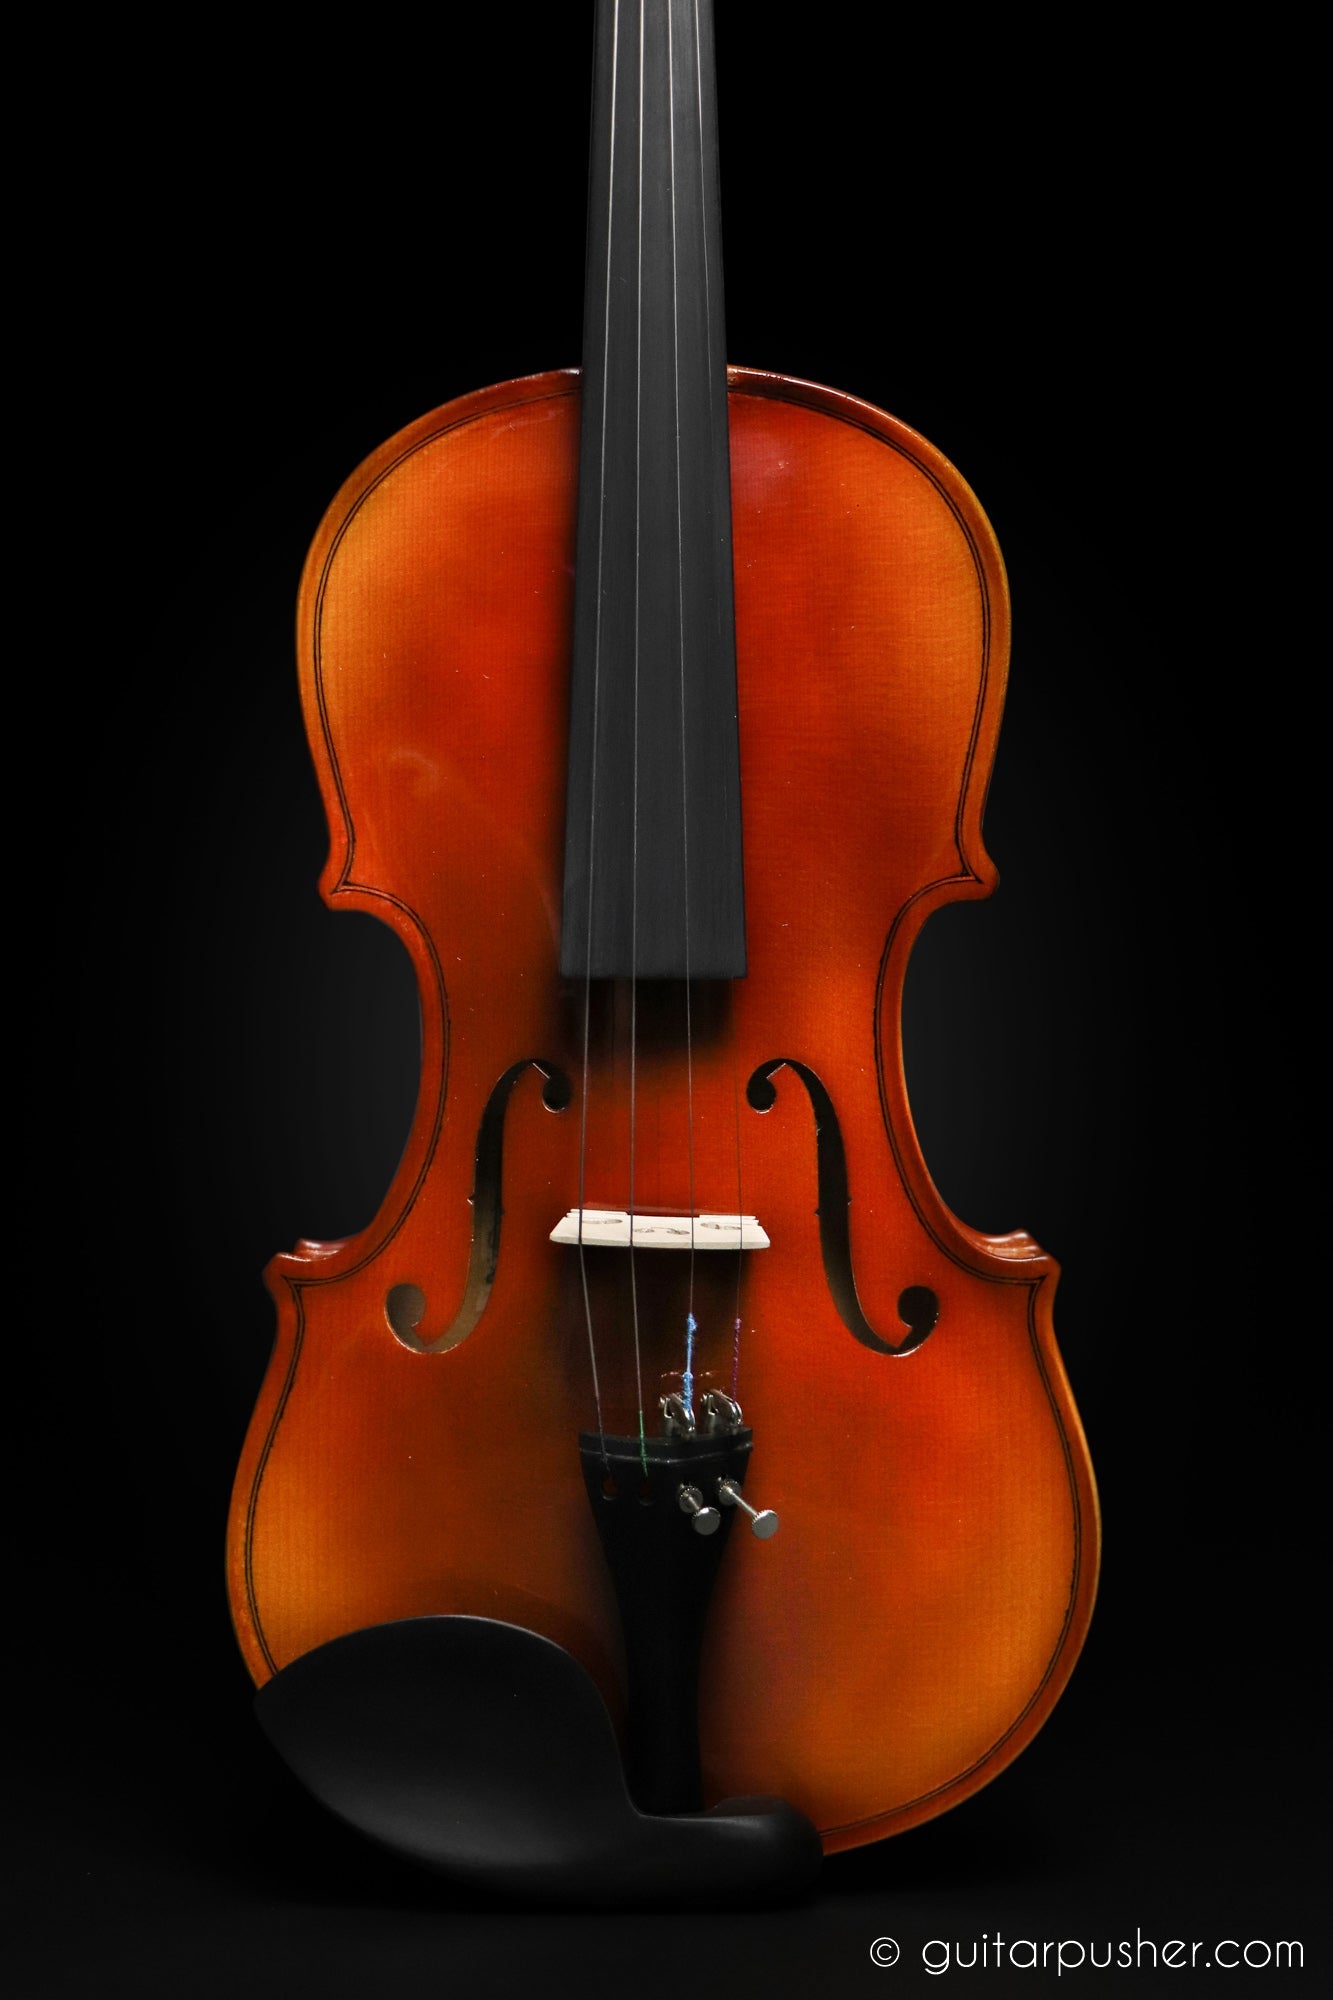 Trevino V401 4/4 Full Solid Wood Violin with Case